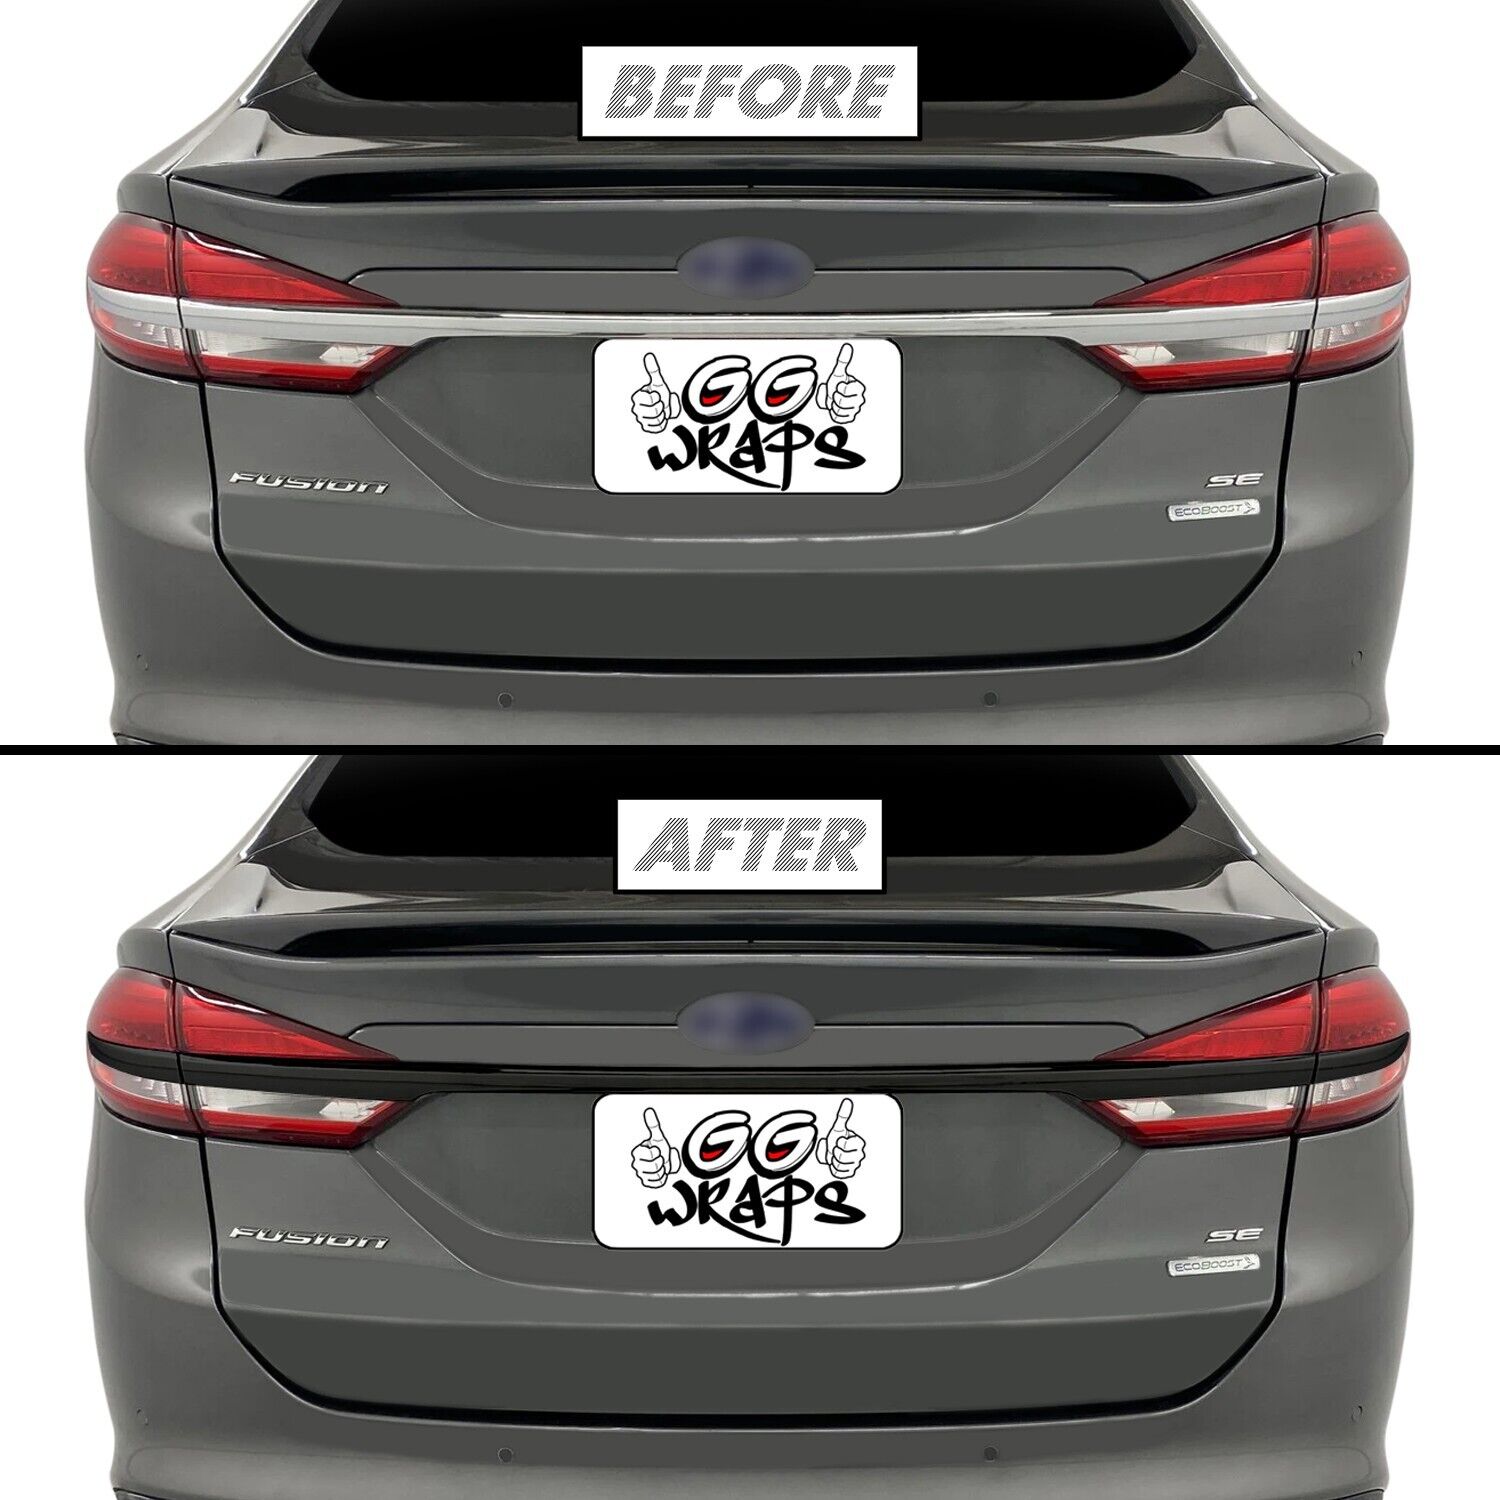 Chrome Delete Blackout Overlay for 2017-18 Ford Fusion Rear Back Trunk Trim 